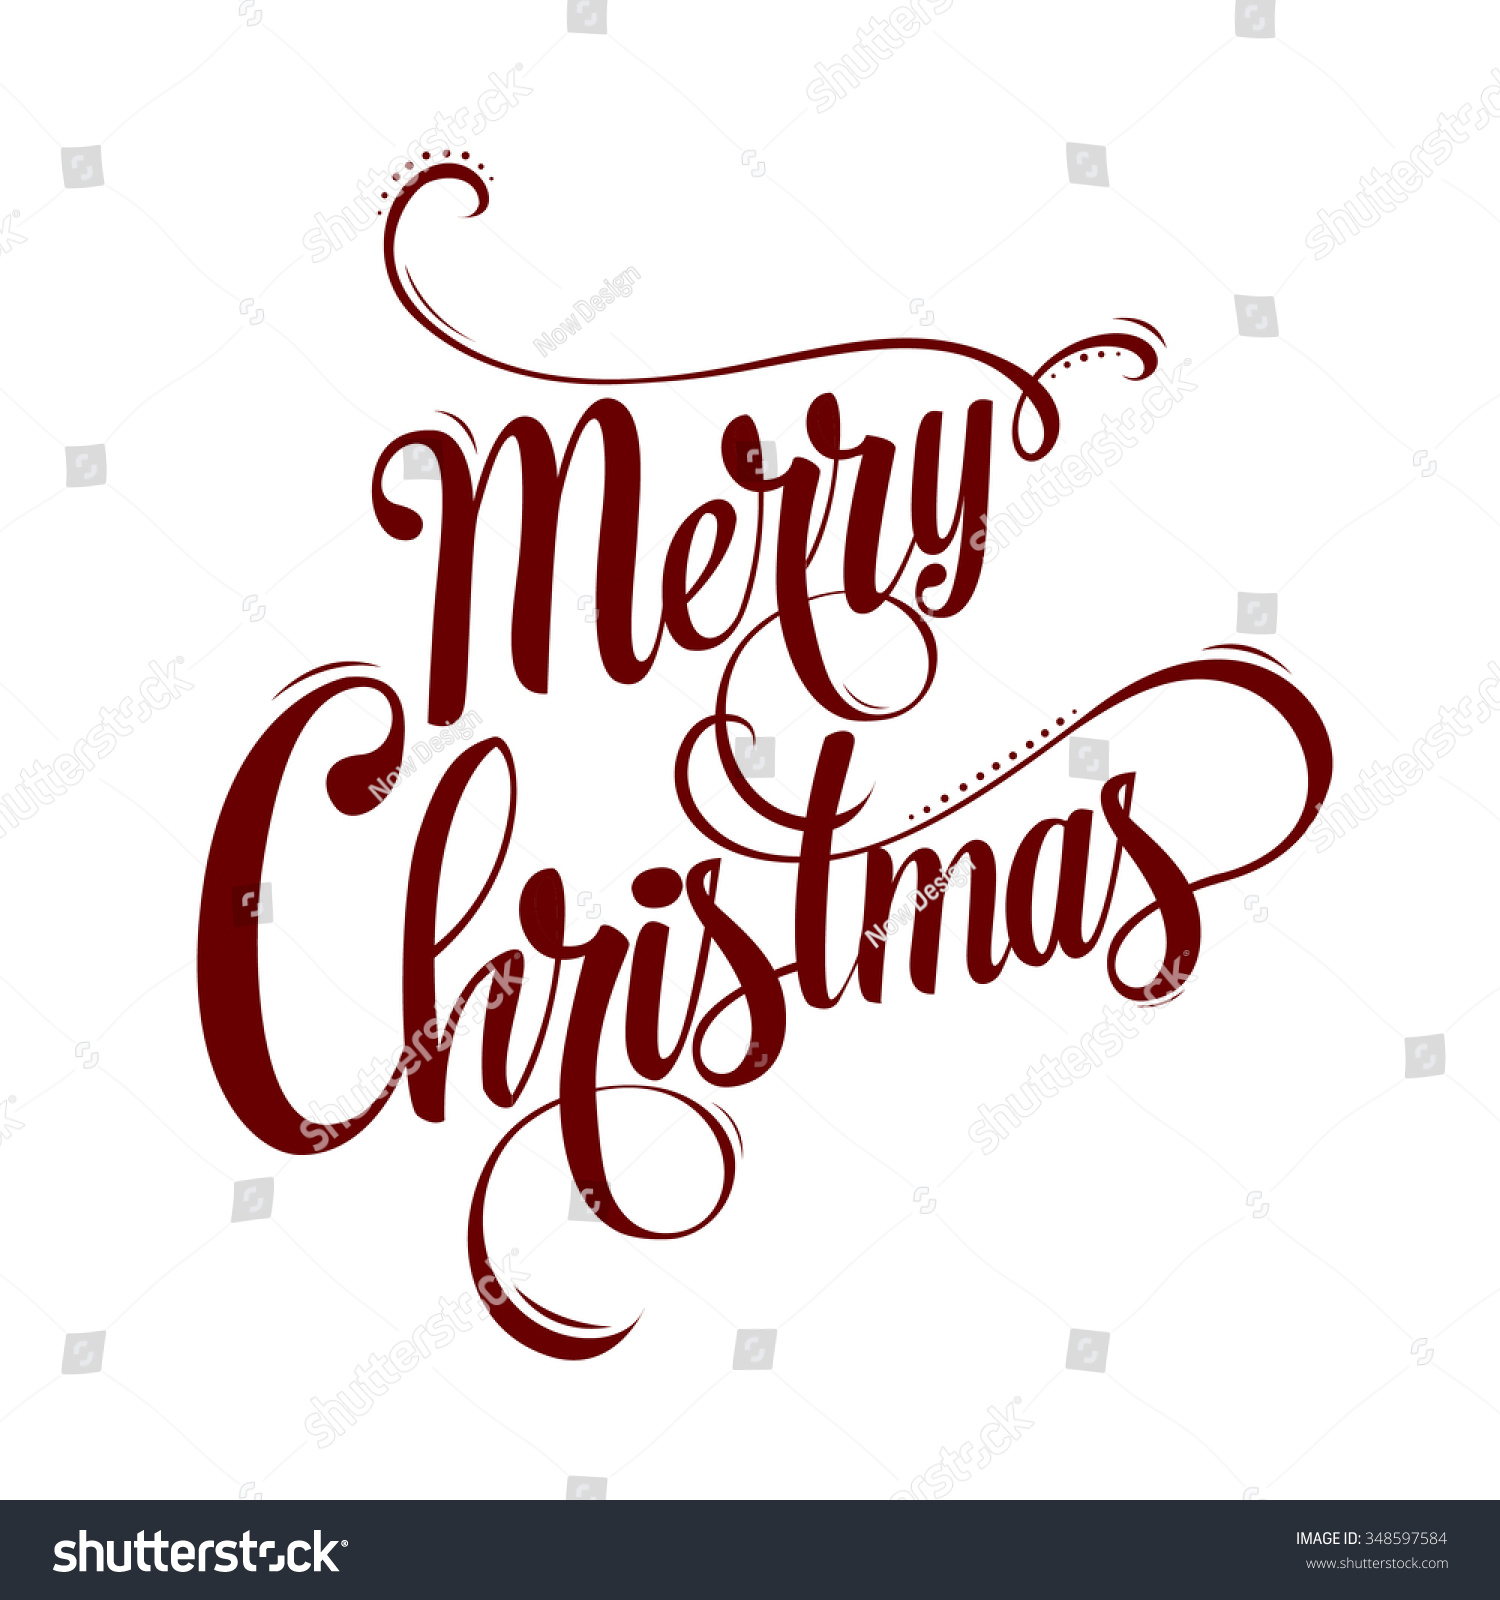 Christmas Calligraphy Hand Drawn Design Elements Stock 